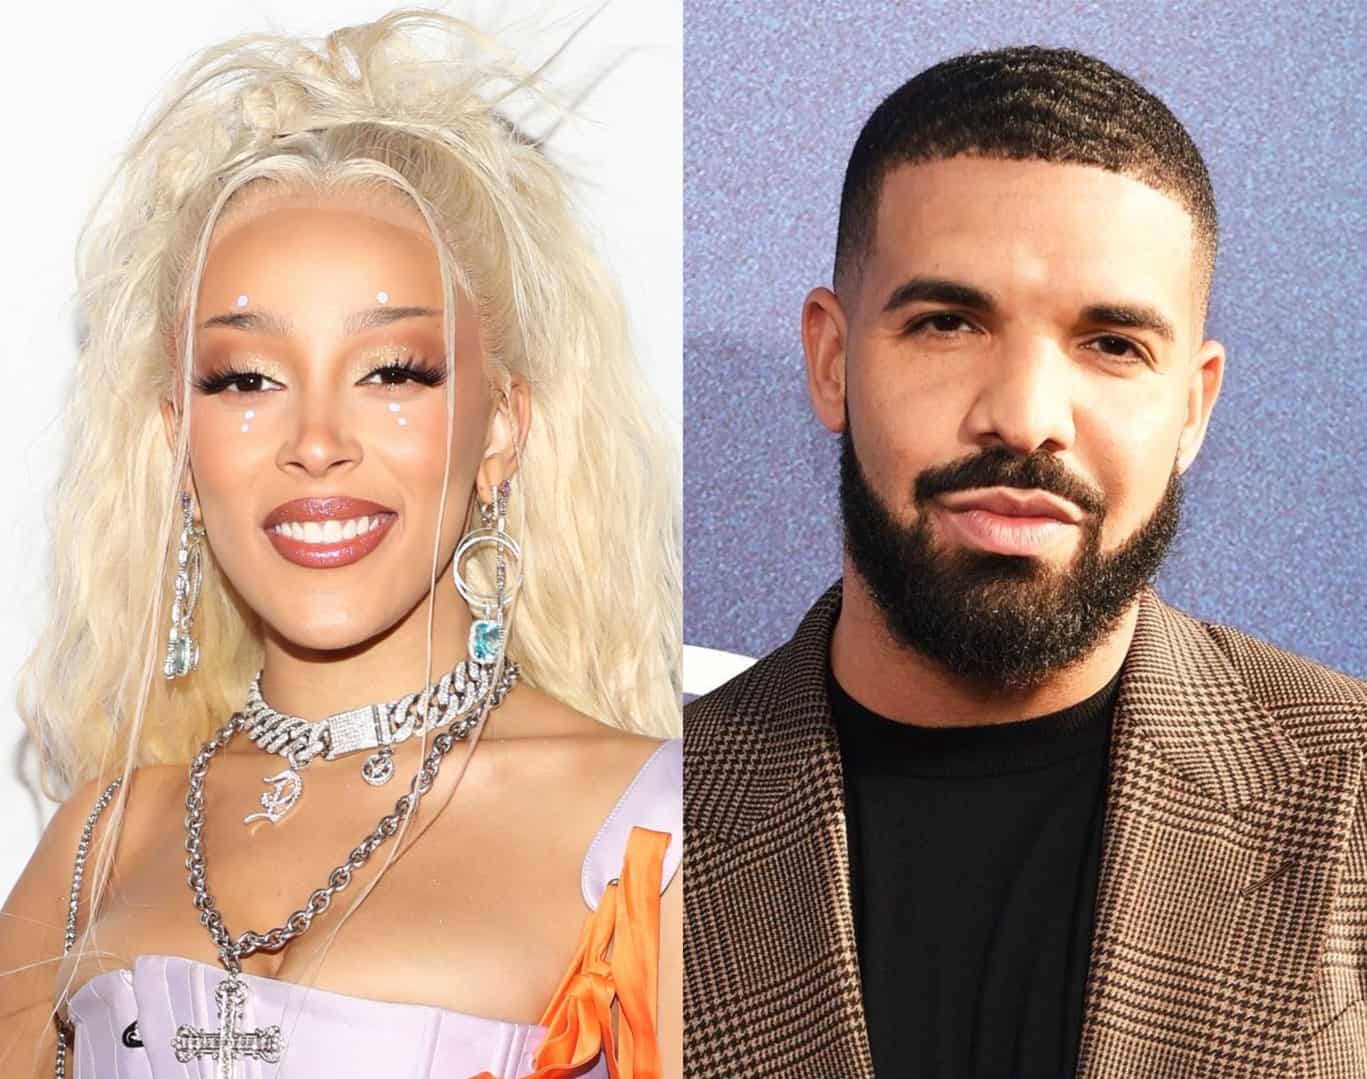 Doja Cat Topple Drake To Become Rapper with Most Monthly Listeners on Spotify